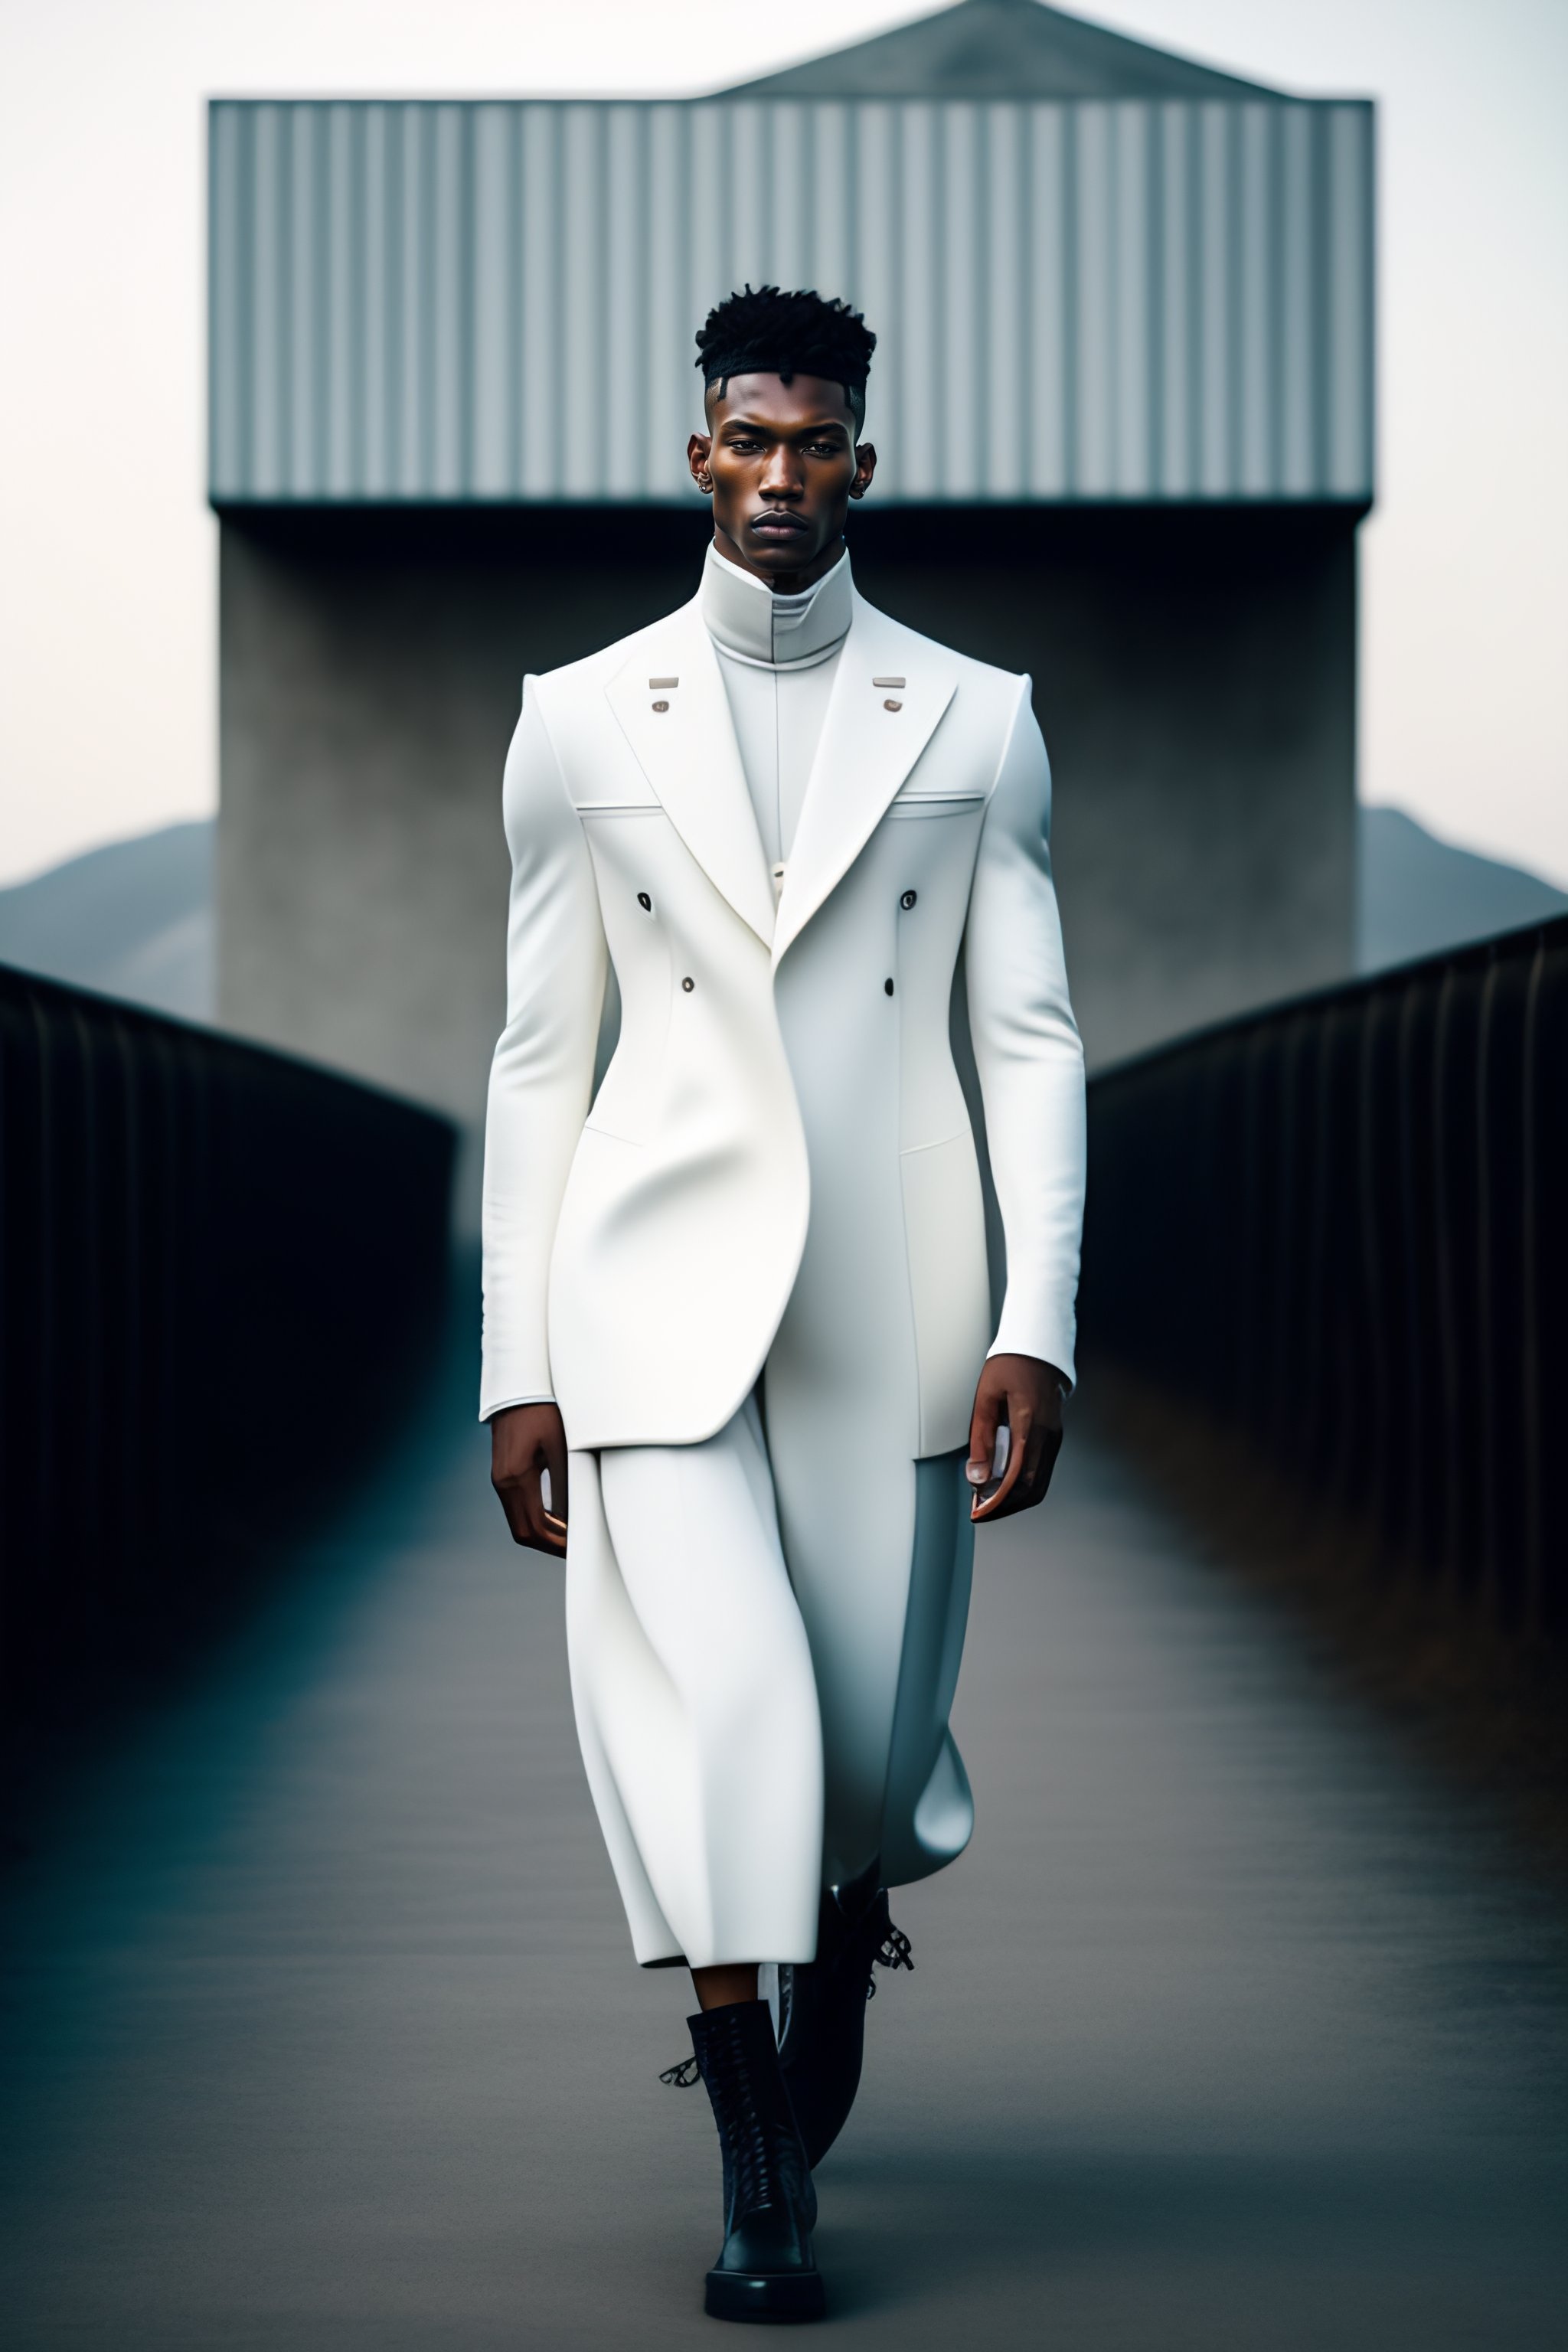 Lexica - Ultra hd! editorial, rick owens, man model, white and chrome ...